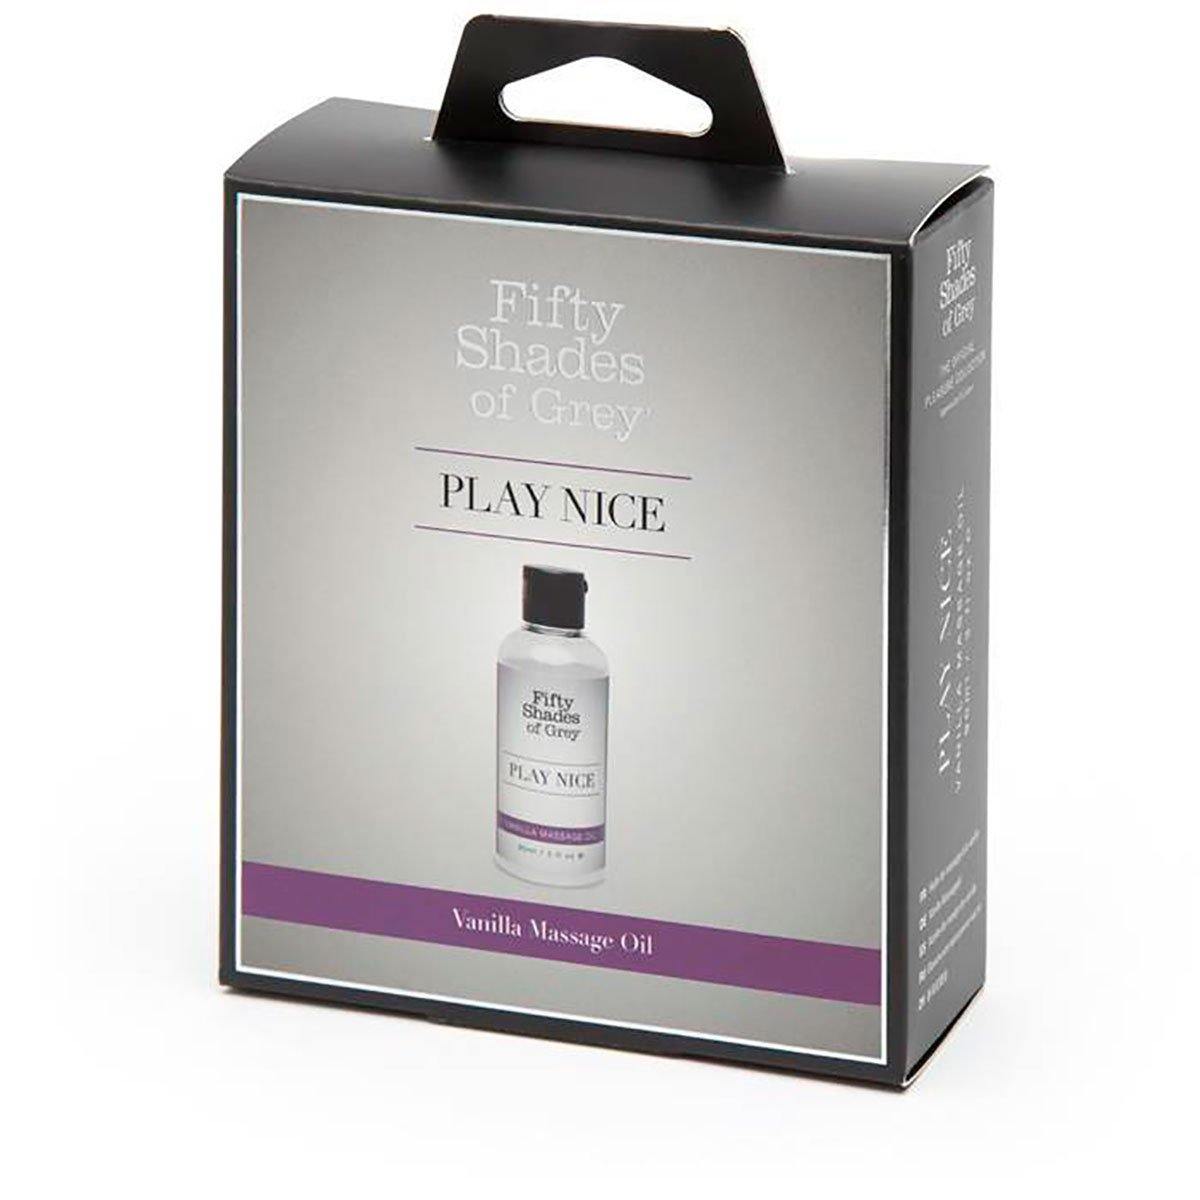 Fifty Shades - Play Nice Vanilla Massage Oil 3oz - Buy At Luxury Toy X - Free 3-Day Shipping